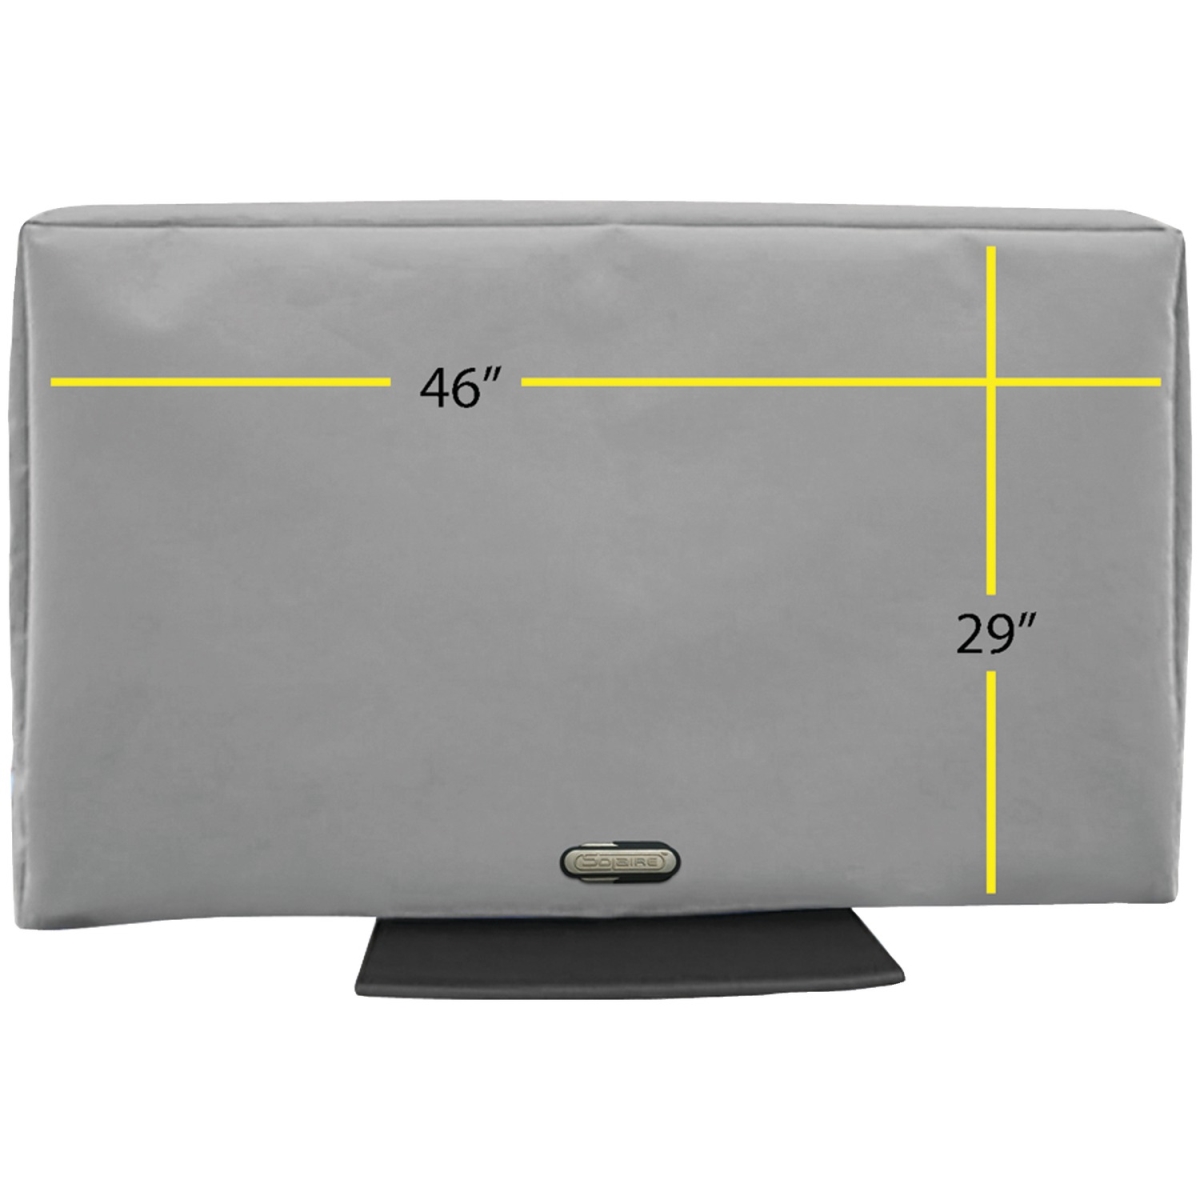 Hdysol46g Outdoor Tv Cover, 46-52 In. - Gray